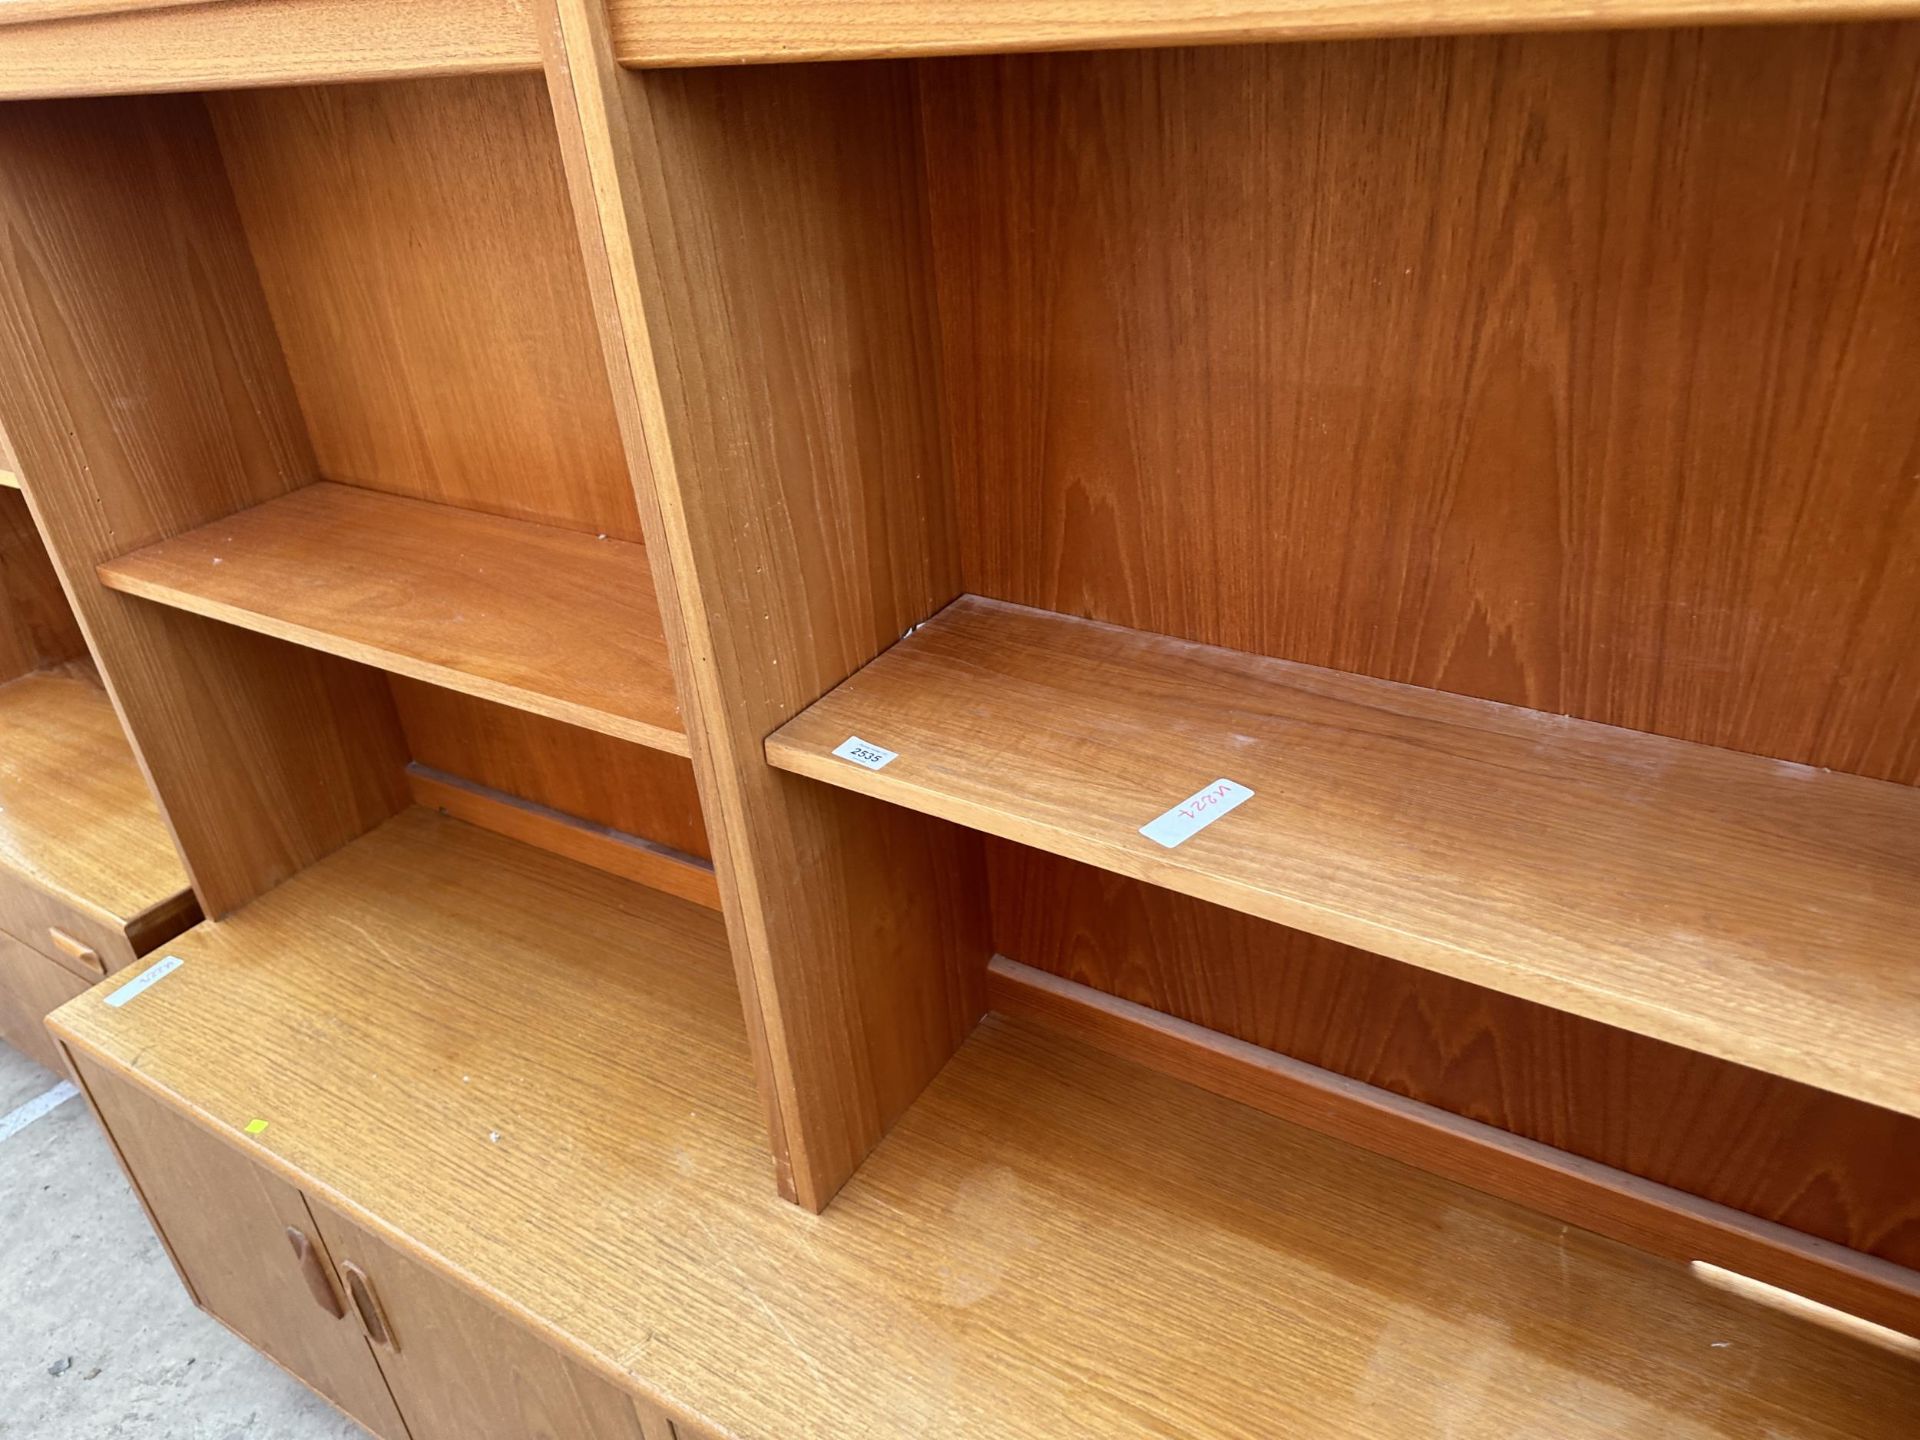 A G PLAN RETRO TEAK UNIT WITH TWO GLAZED UPPER DOORS AND DRAWERS TO BASE 64" WIDE - Image 3 of 6